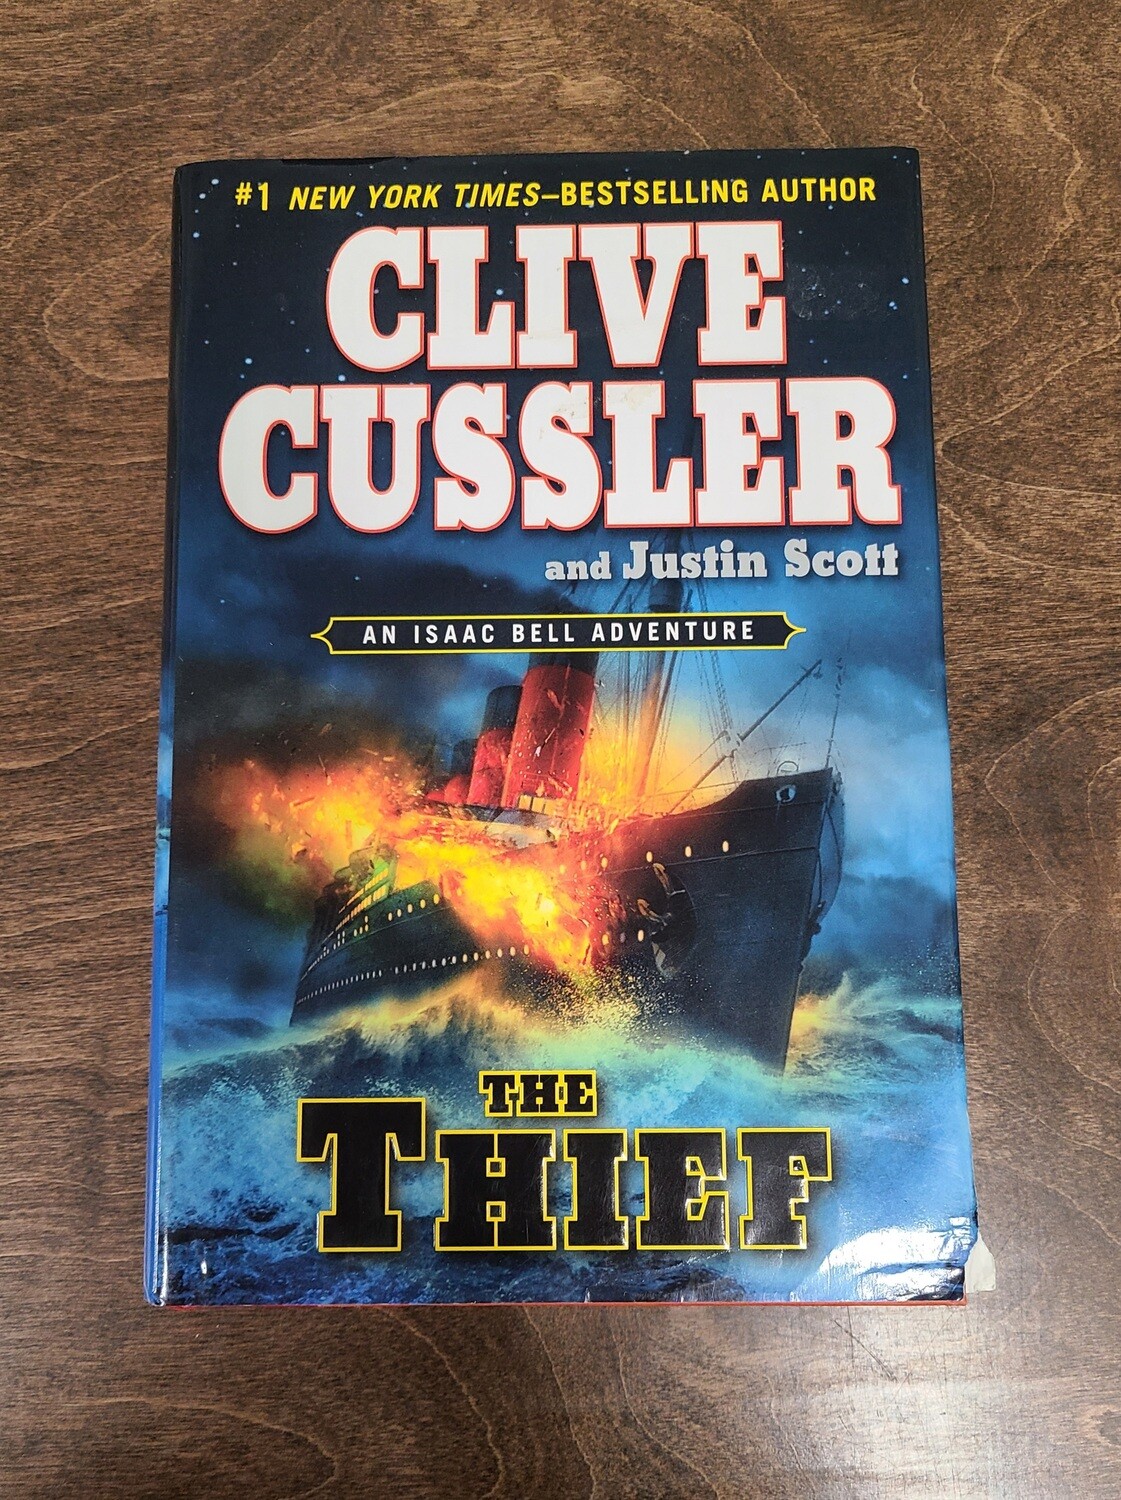 The Thief by Clive Cussler and Justin Scott